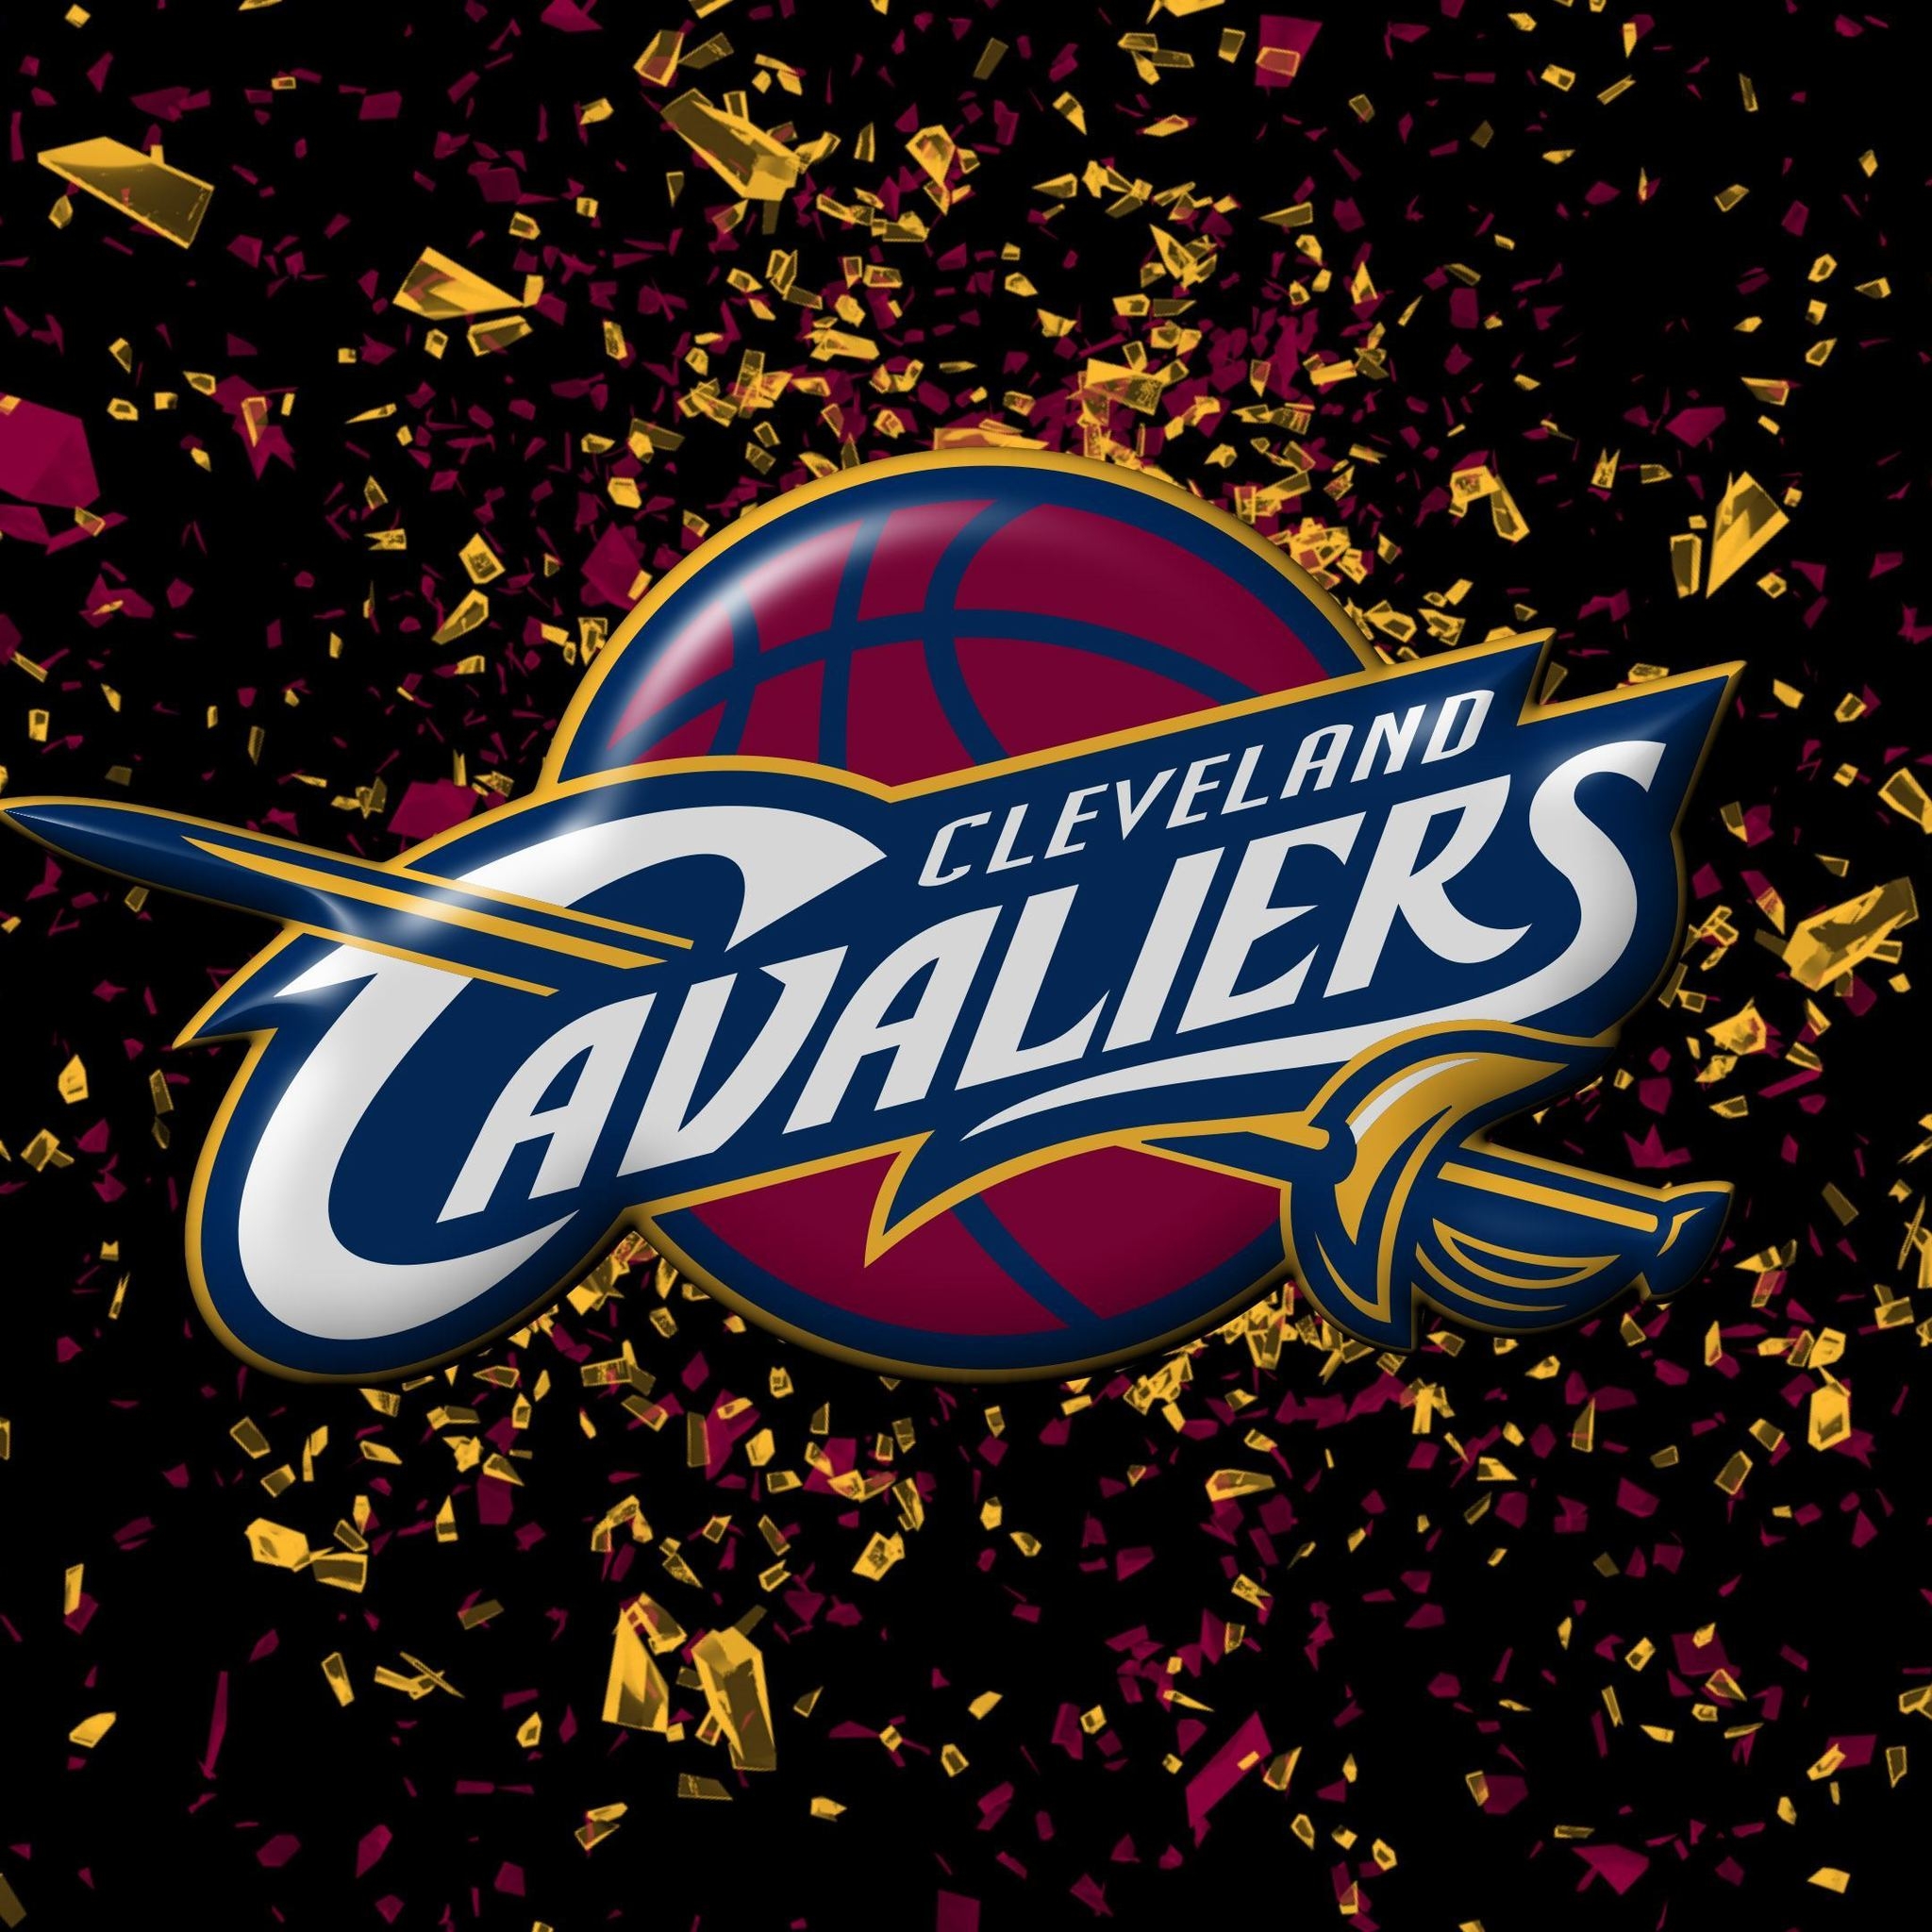 Cleveland Cavaliers for 2048 x 2048 New iPad resolution